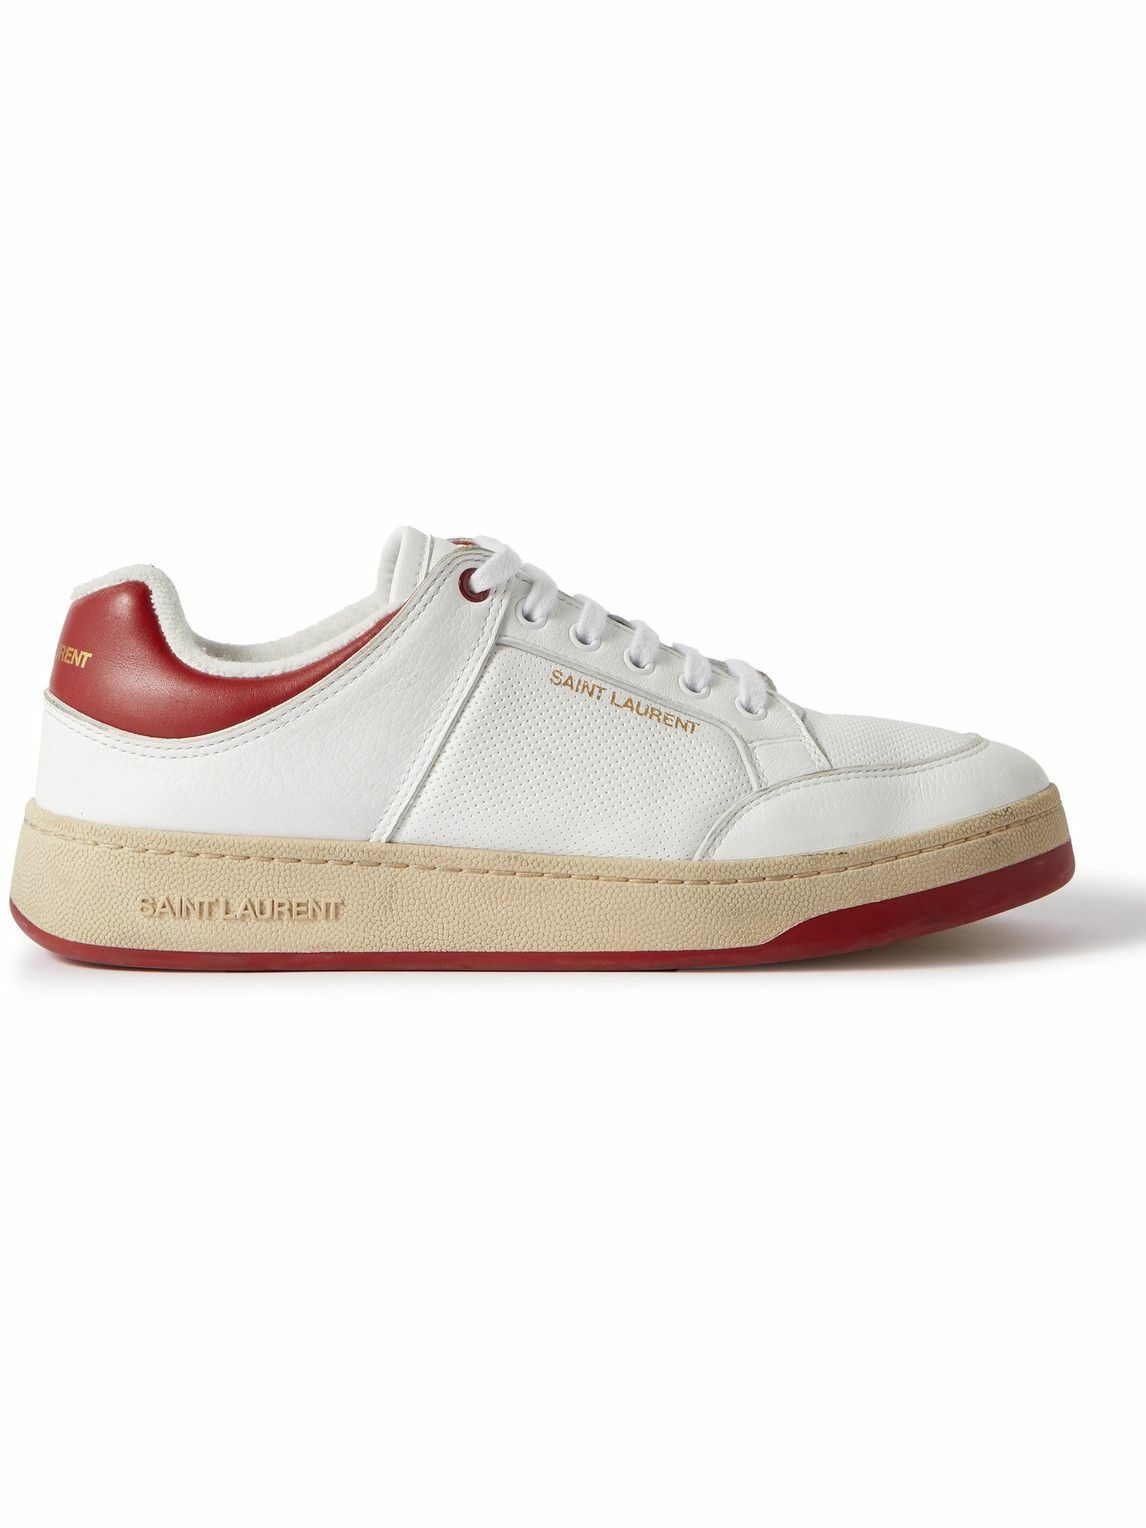 Photo: SAINT LAURENT - SL/61 Perforated Leather Sneakers - Red